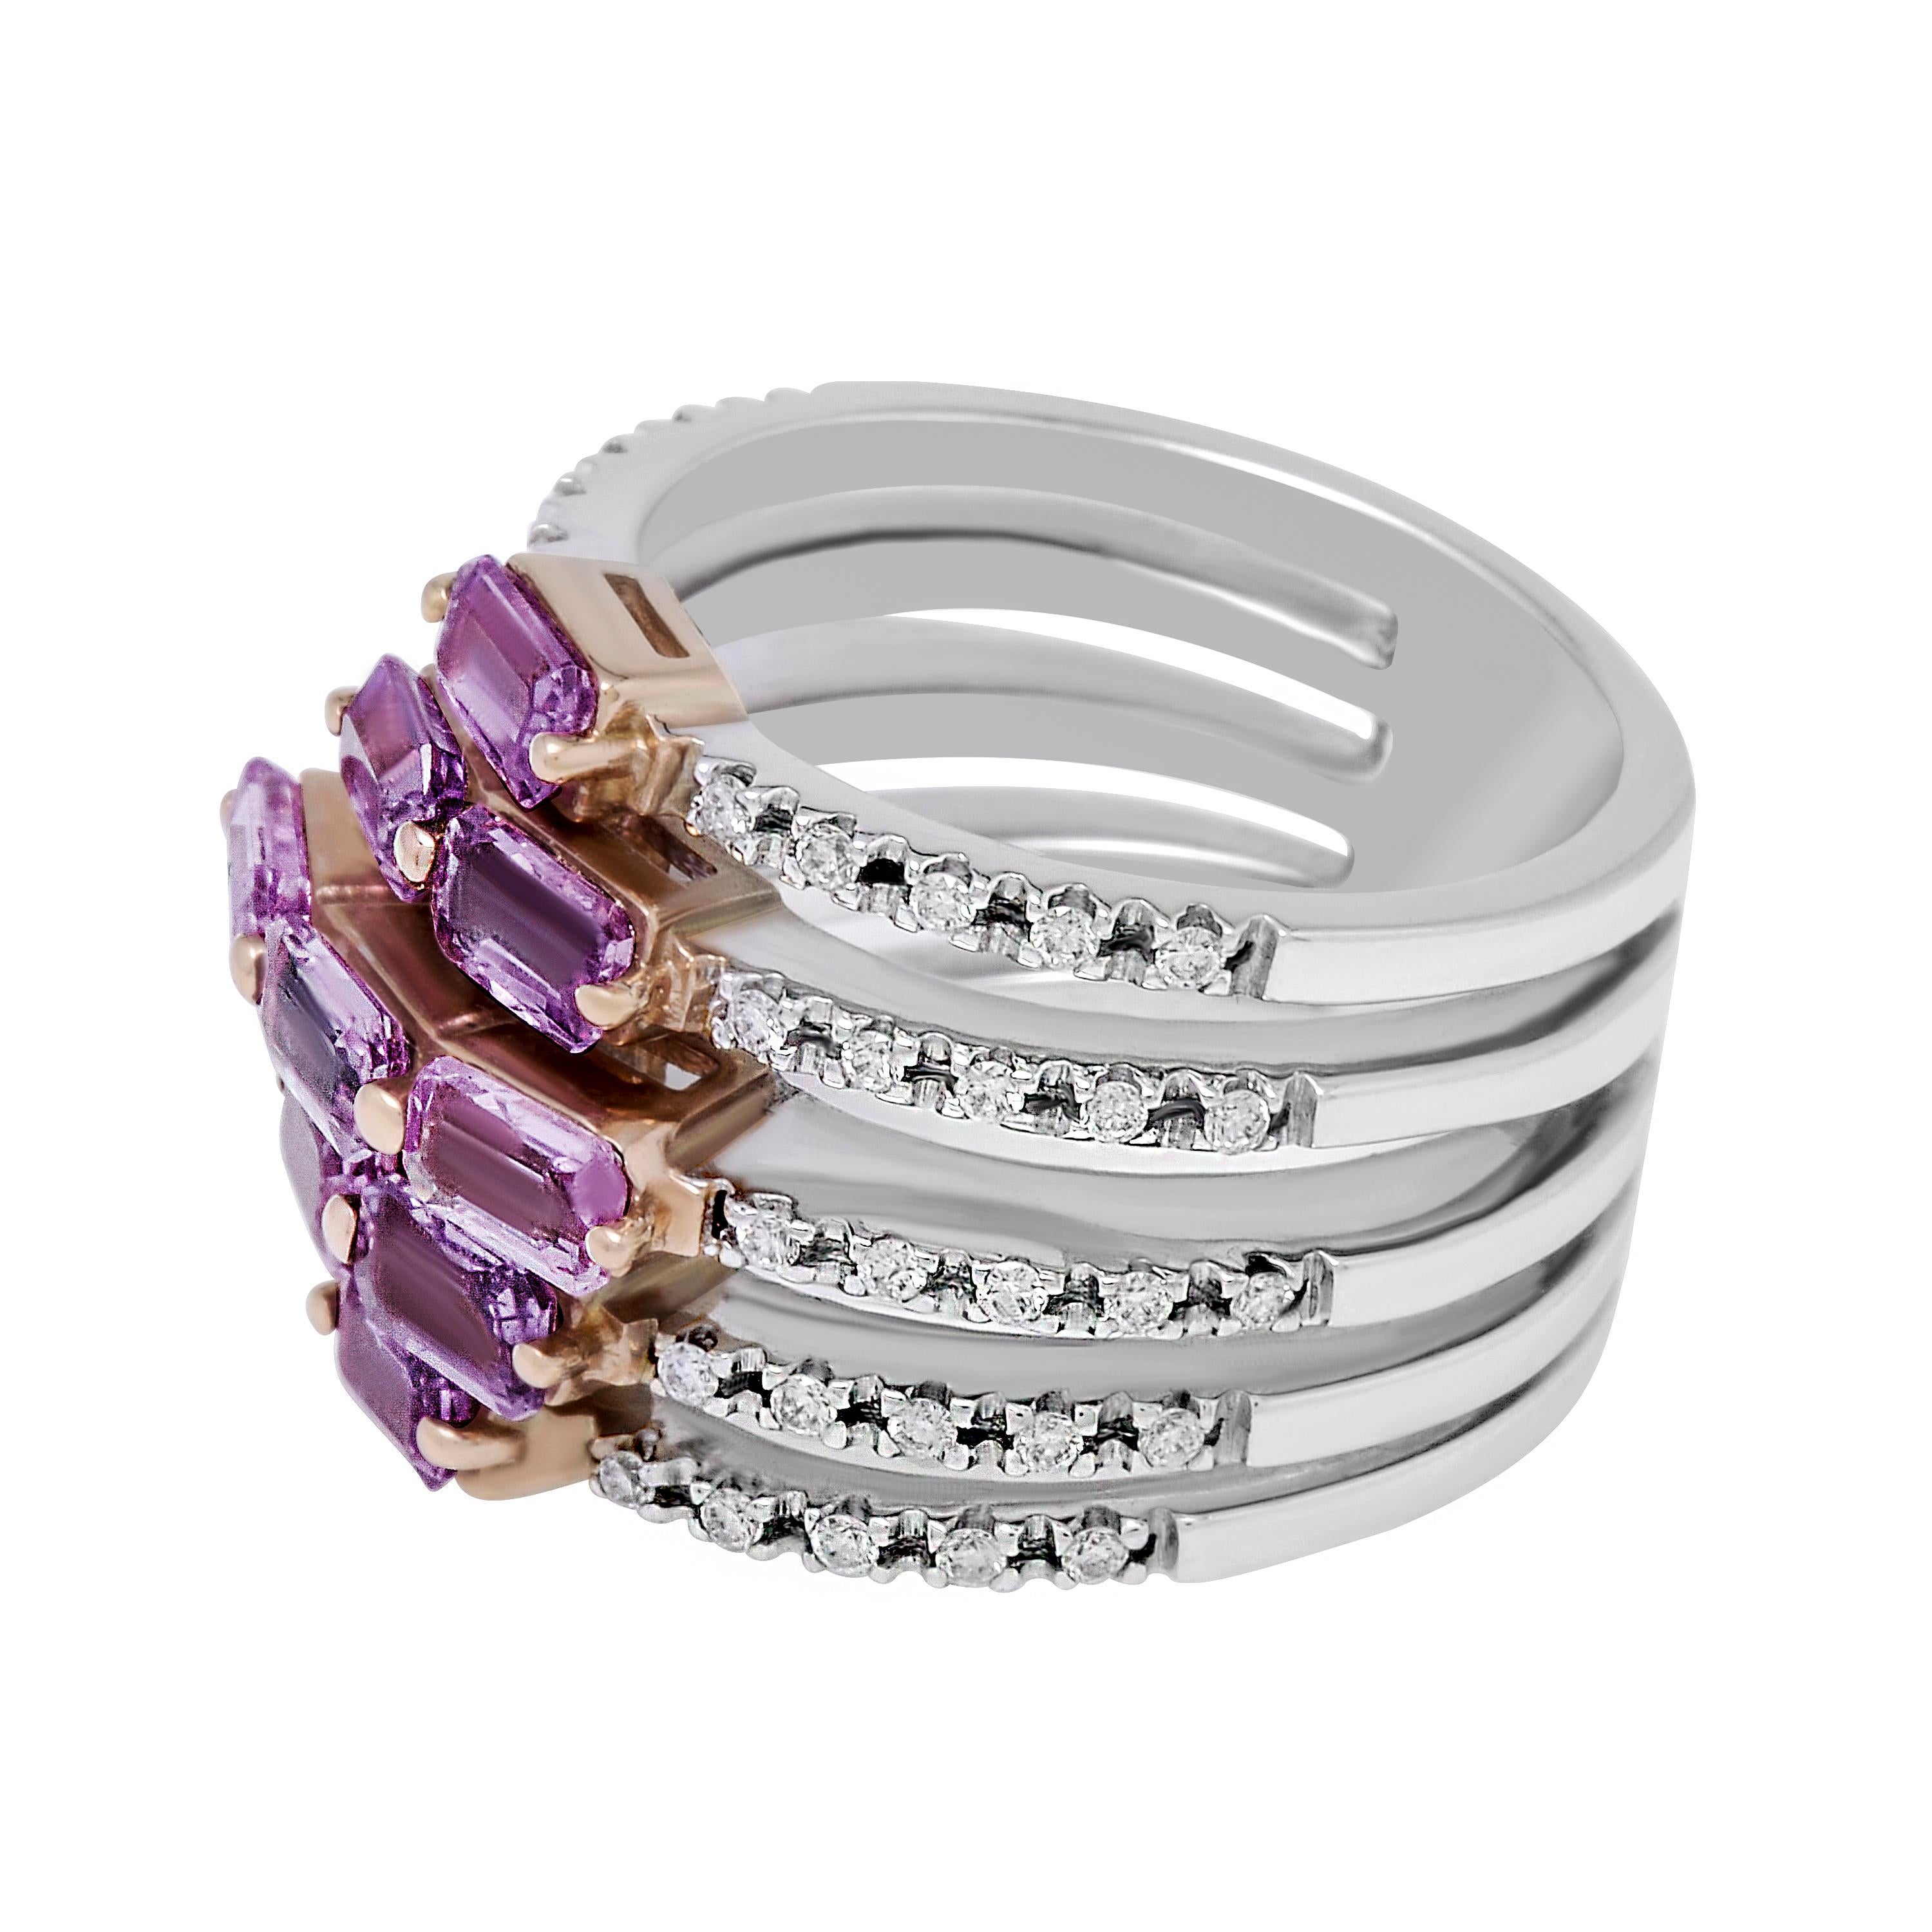 Contemporary Zydo 18K White Gold, Lavender Sapphire and Diamond Ring Sz 7 For Sale